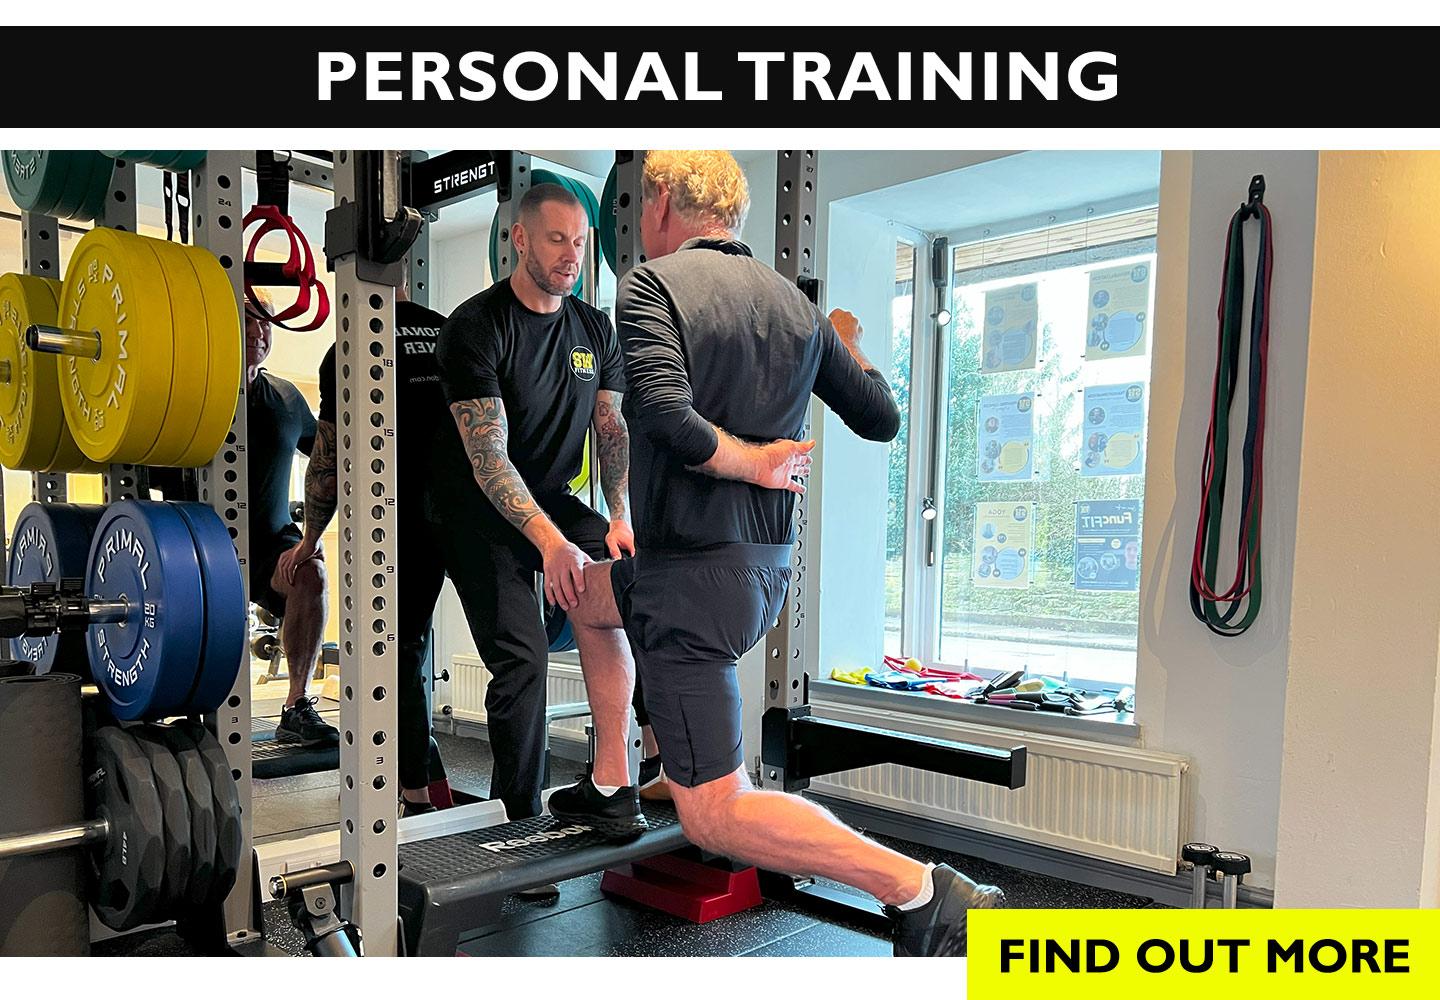 Personal Training session at the gym studio - find out more.